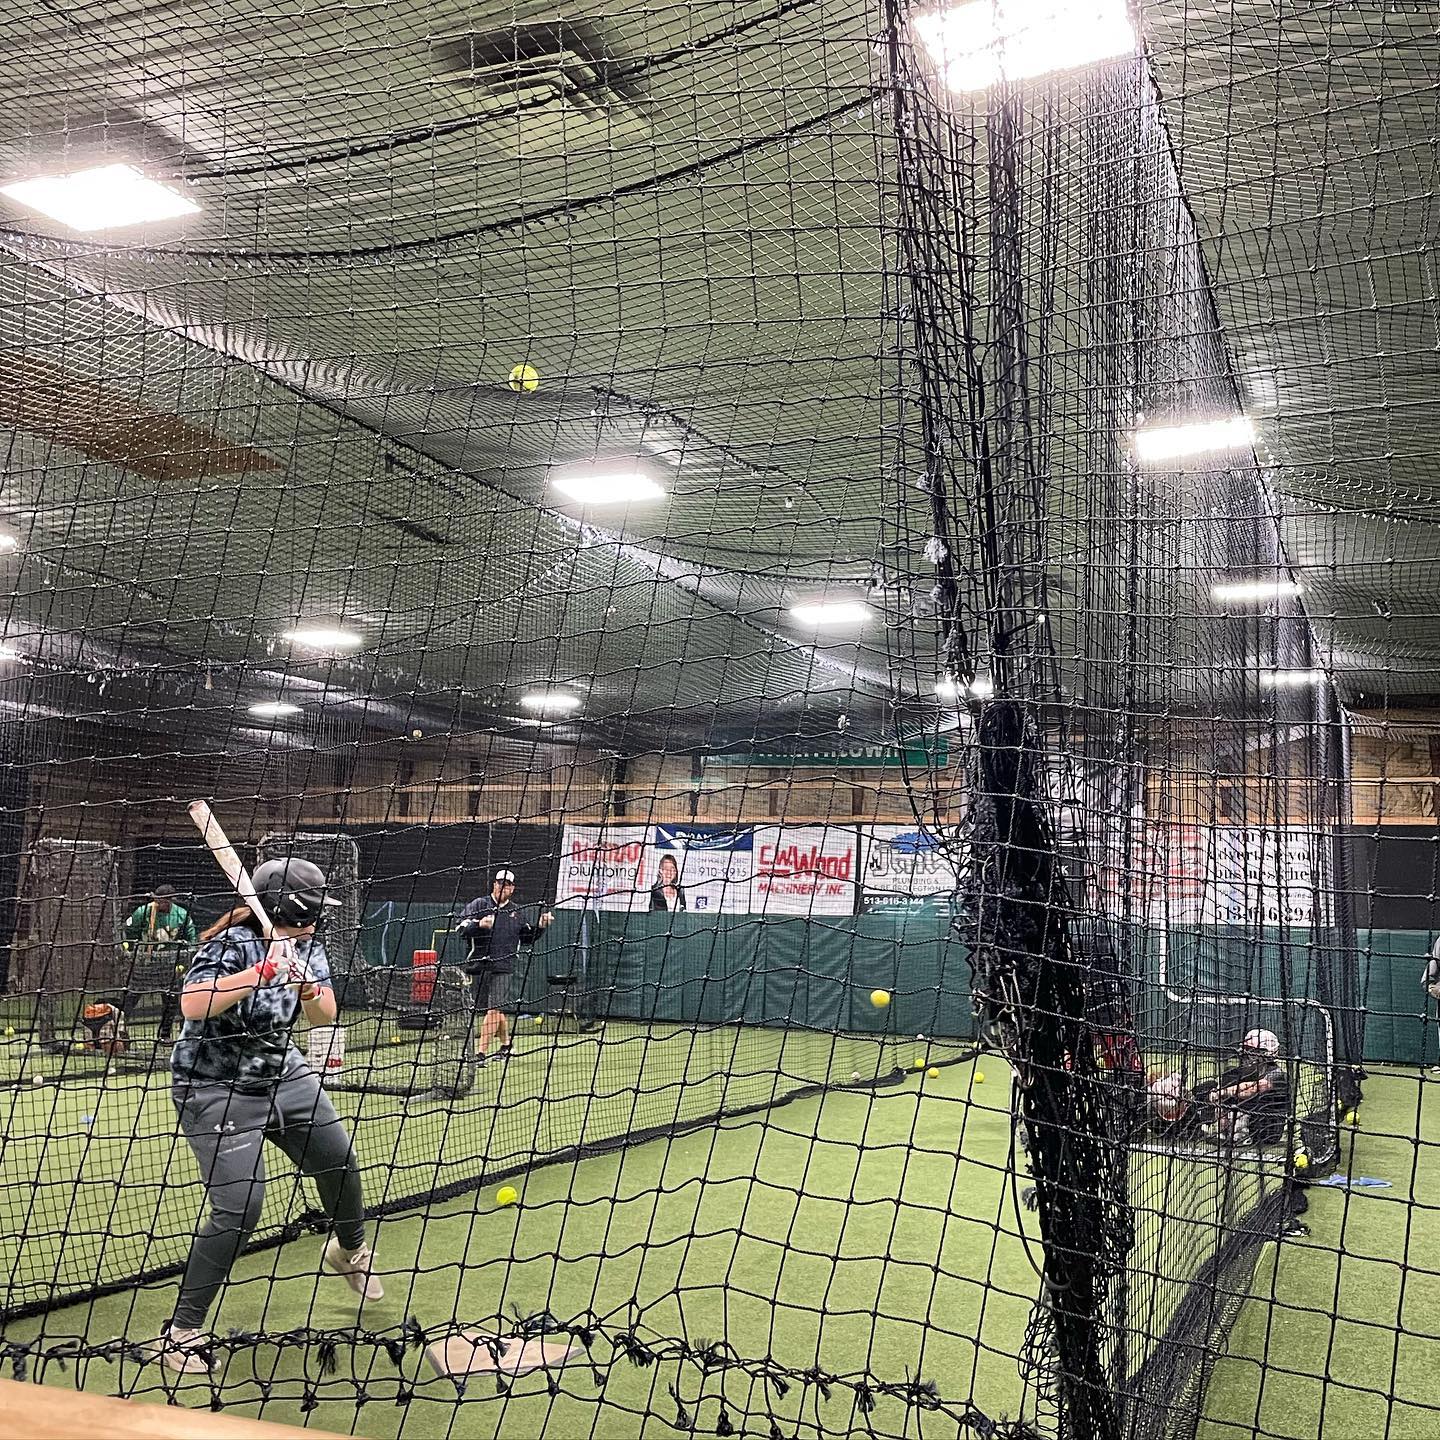 Prime people watching: Thursday night cages. Culture abounds!

I’m listening. Watching. Learning.